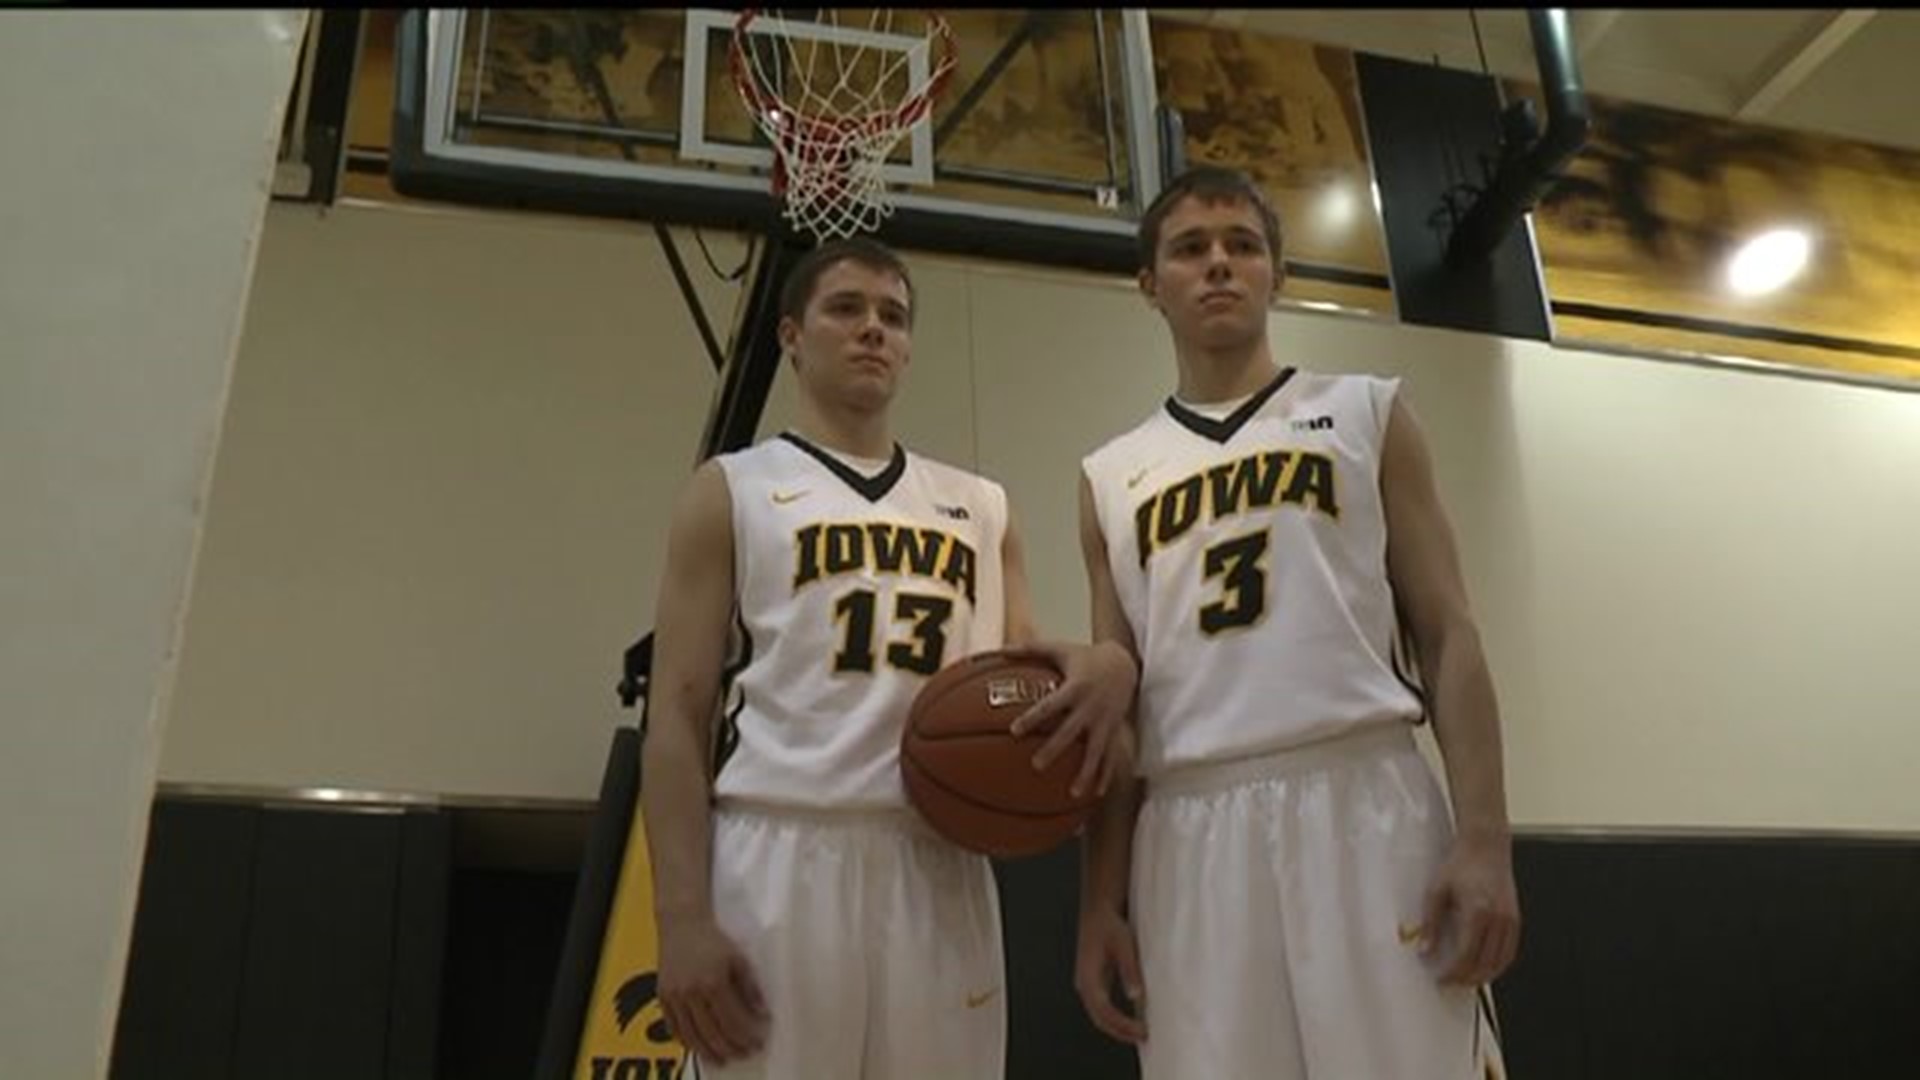 Soukup twins make their dream a reality in Iowa City